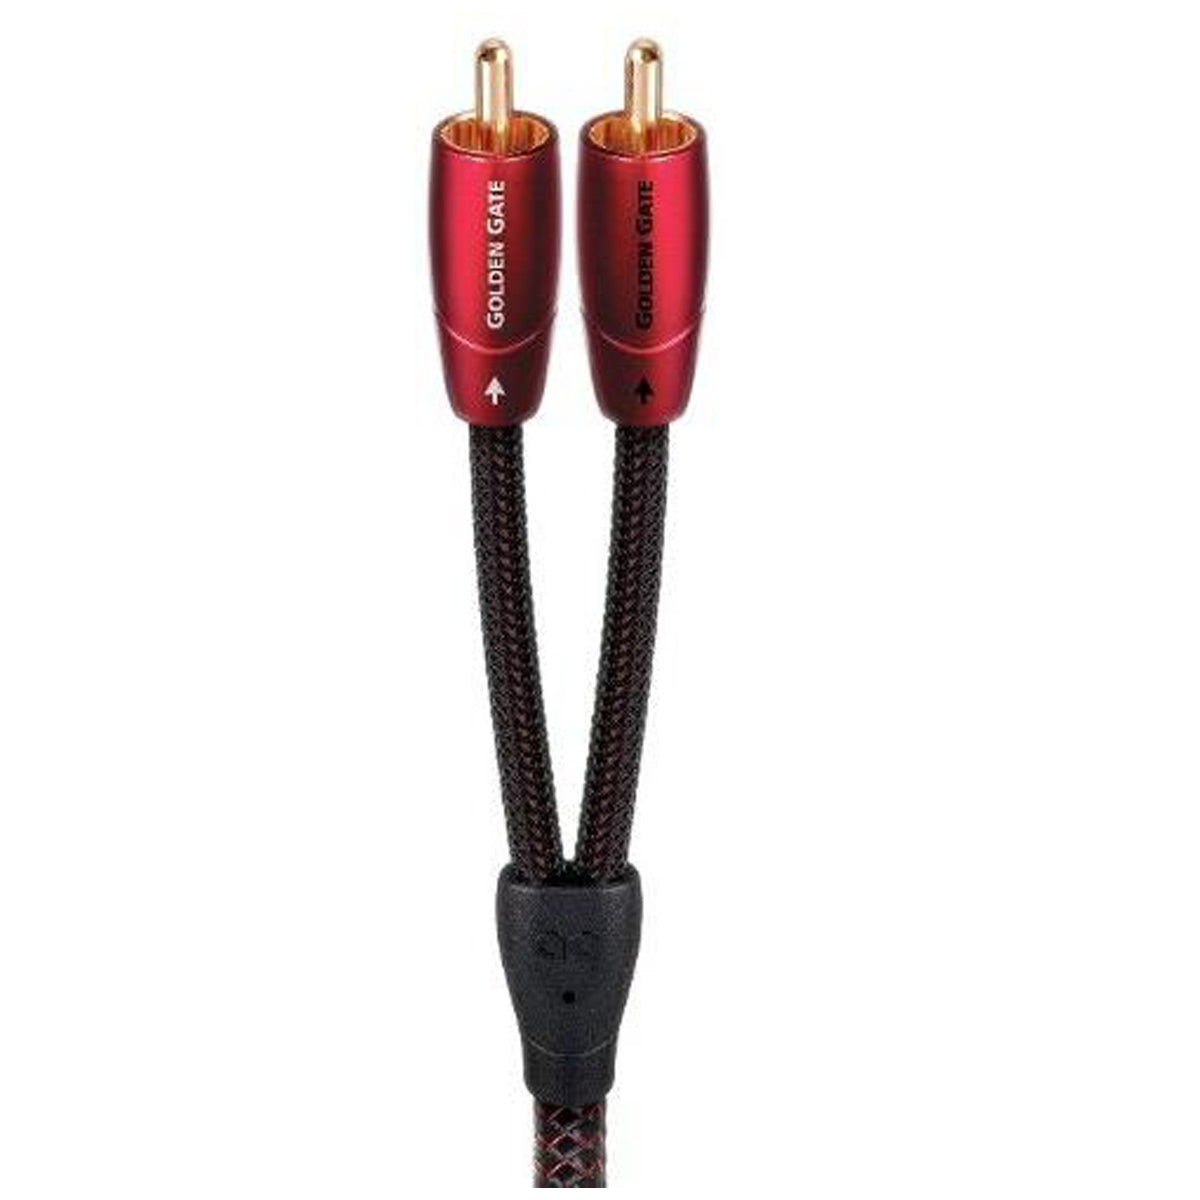 AudioQuest Golden Gate RCA Male to RCA Male Cable - 6.56 ft. (2m)